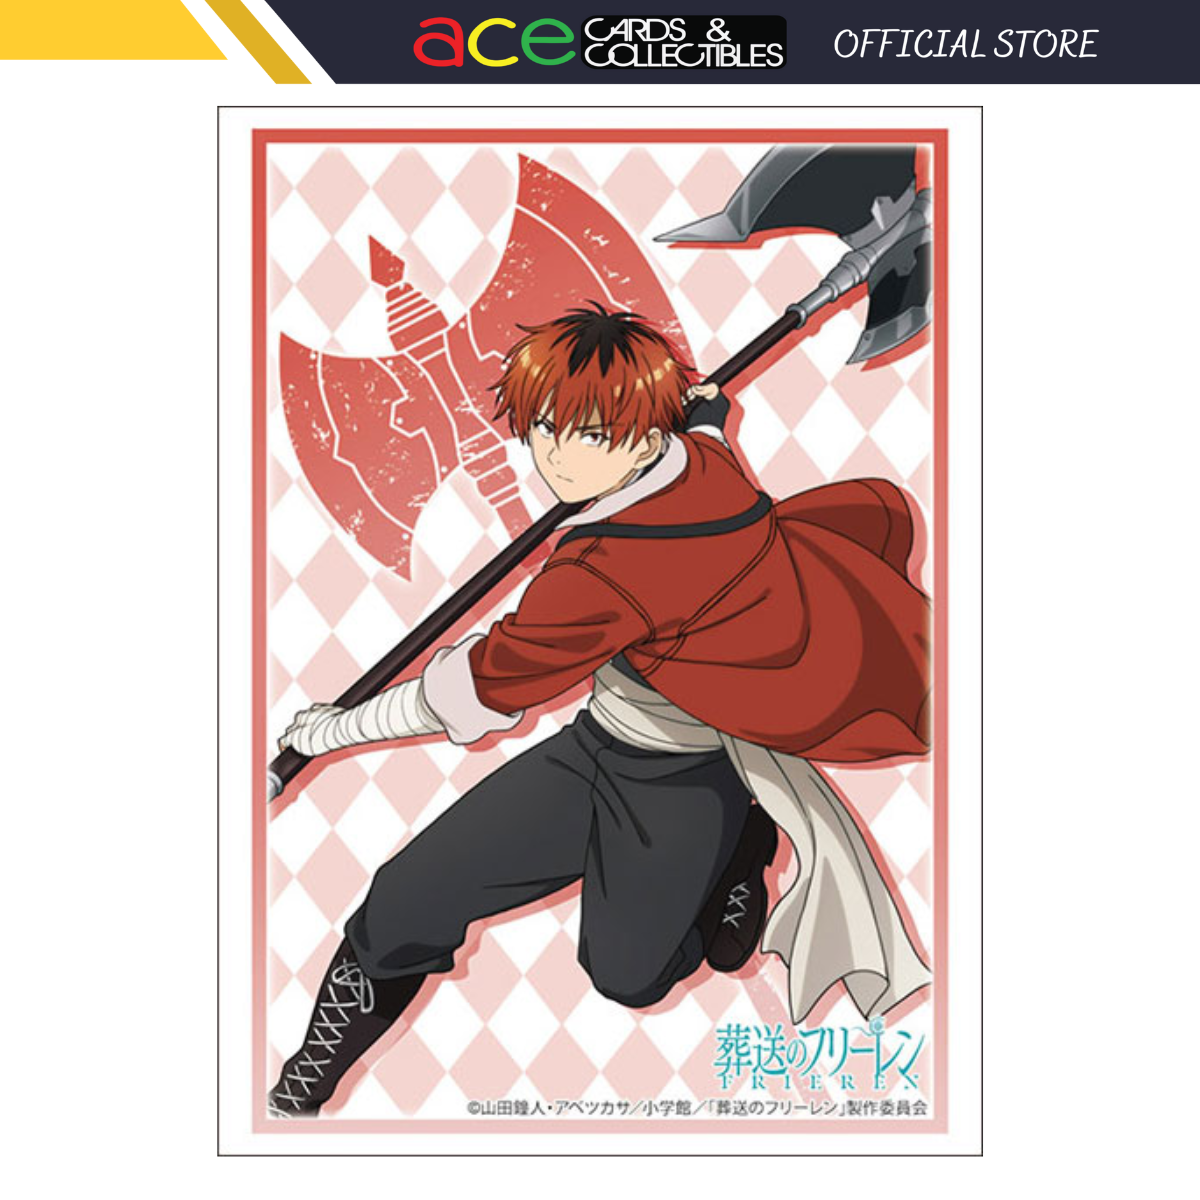 Bushiroad Sleeves Collection -Frieren: Beyond Journey's End- "Stark" (Vol.4152)-Bushiroad-Ace Cards & Collectibles